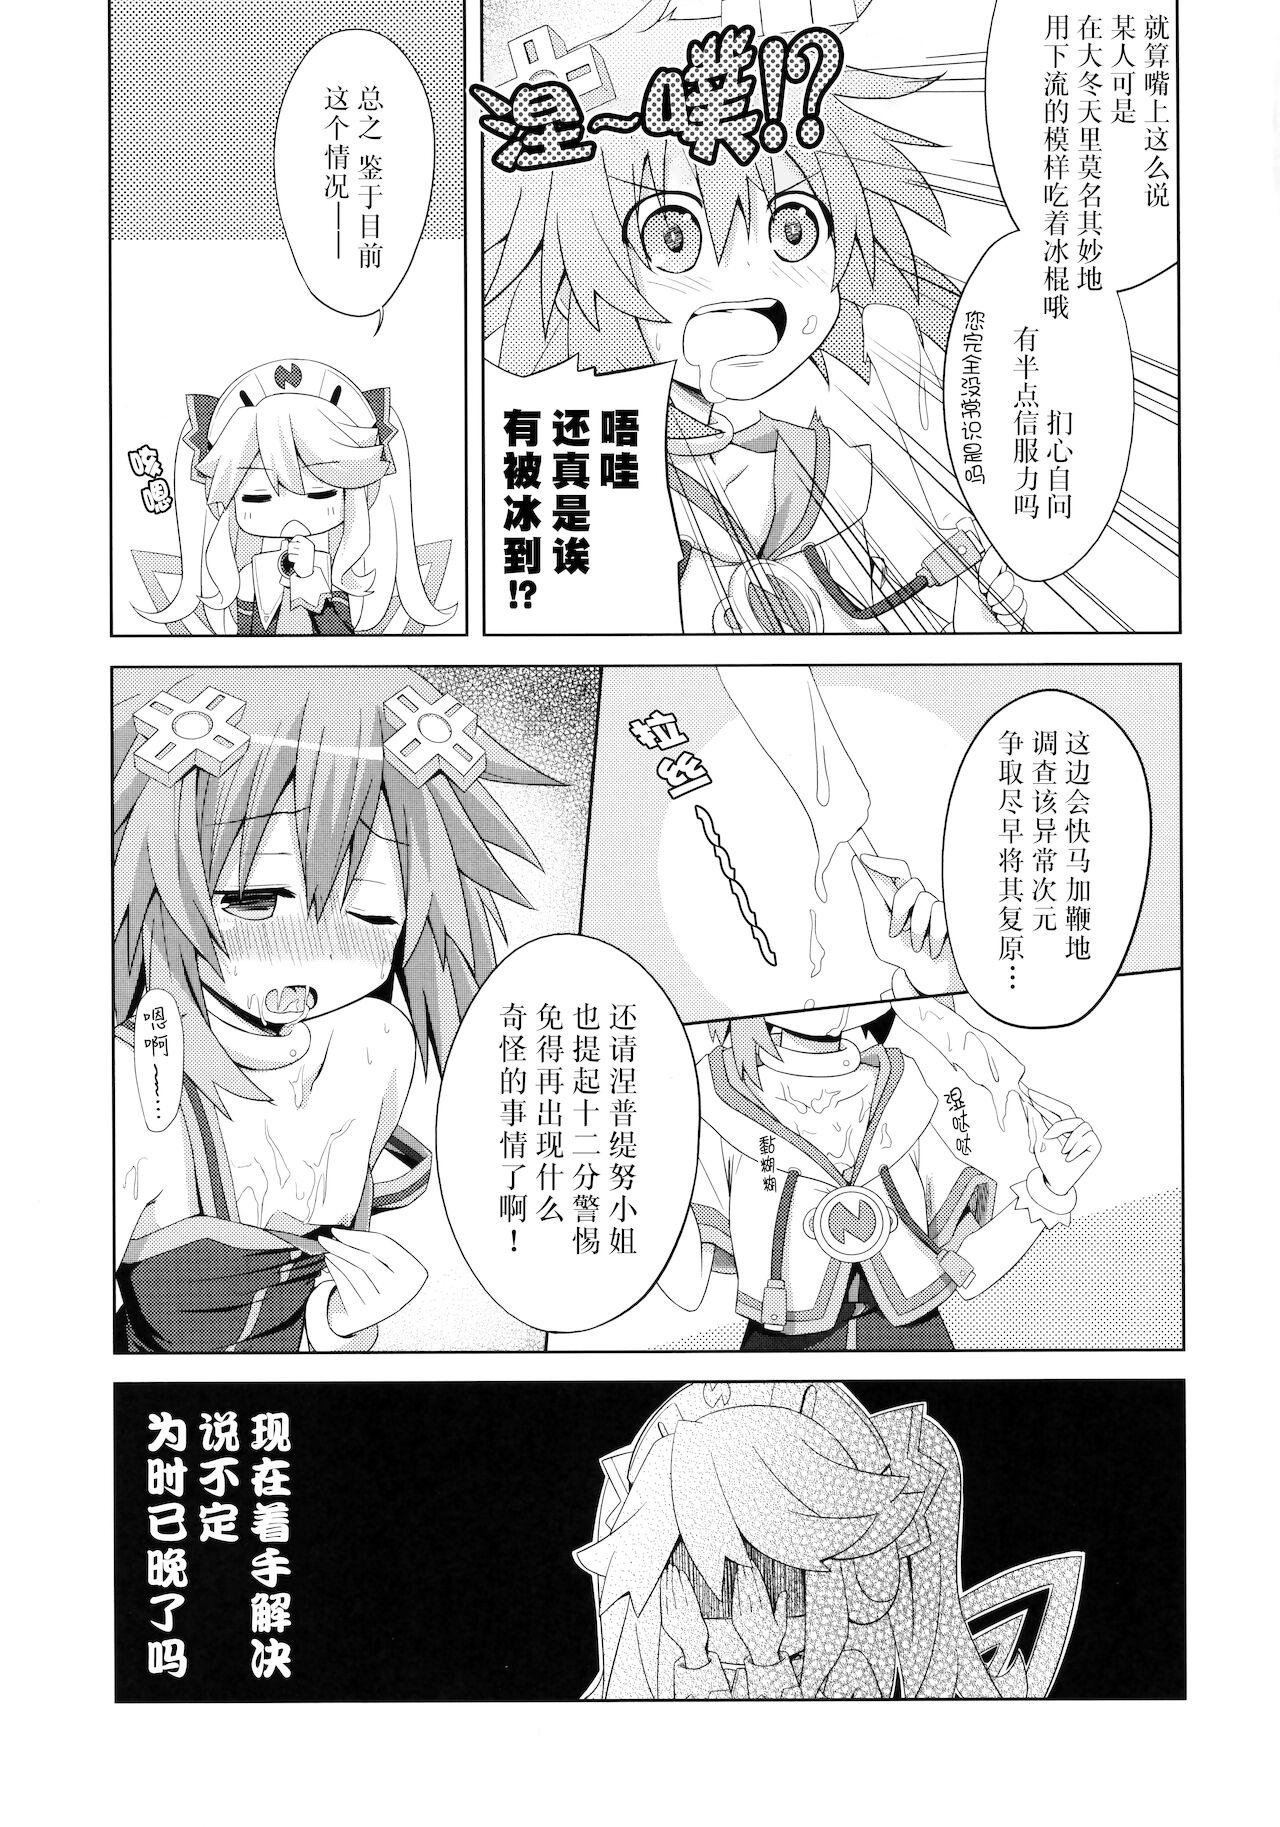 Humiliation A certain Nepgear was harmed in the making of this doujinshi - Hyperdimension neptunia | choujigen game neptune Blowjob - Page 6